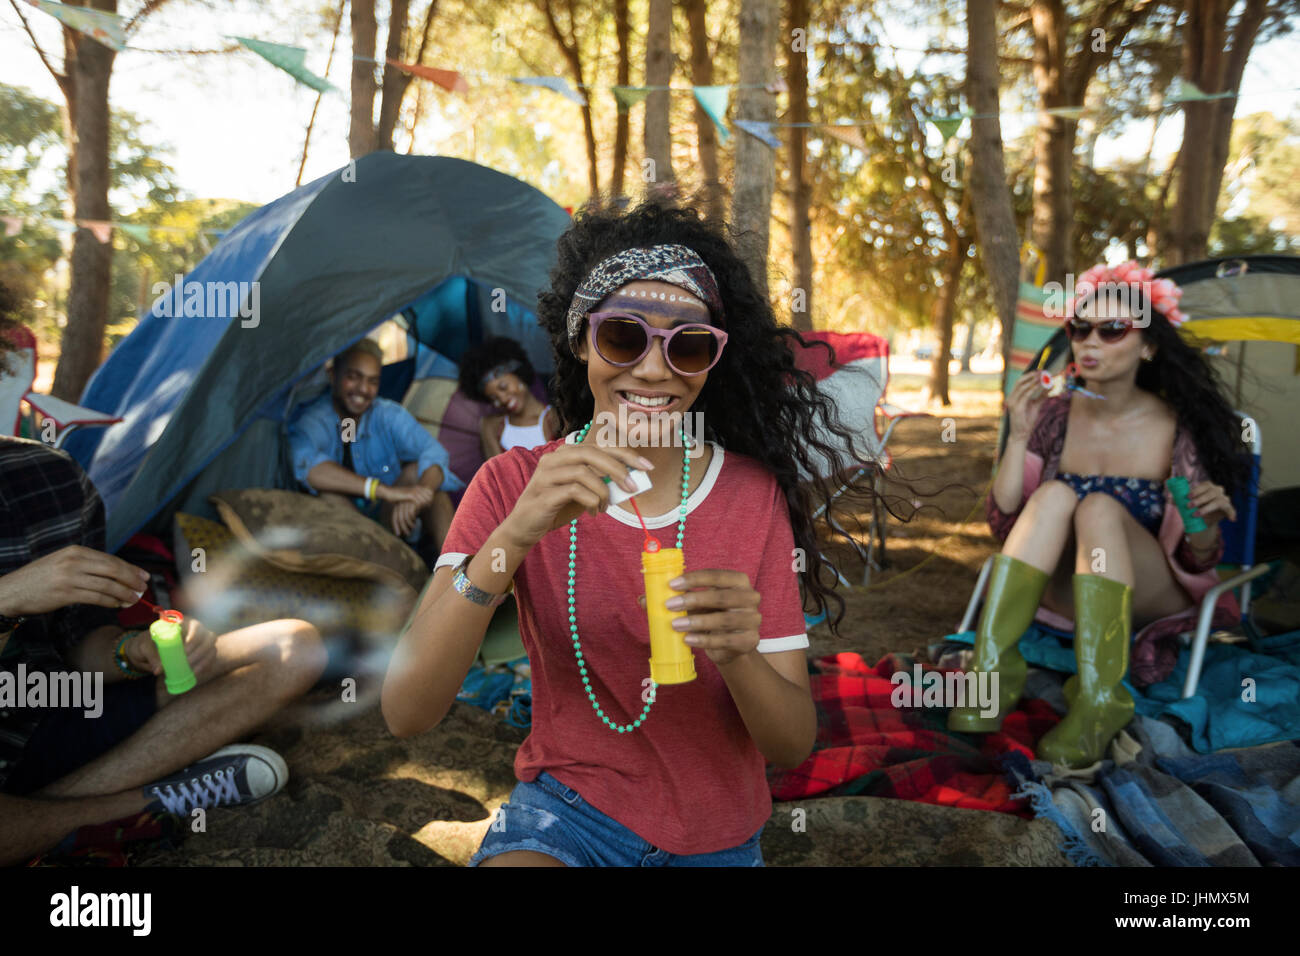 Smiling young woman holding bubble wand with friends in background at campsite Stock Photo